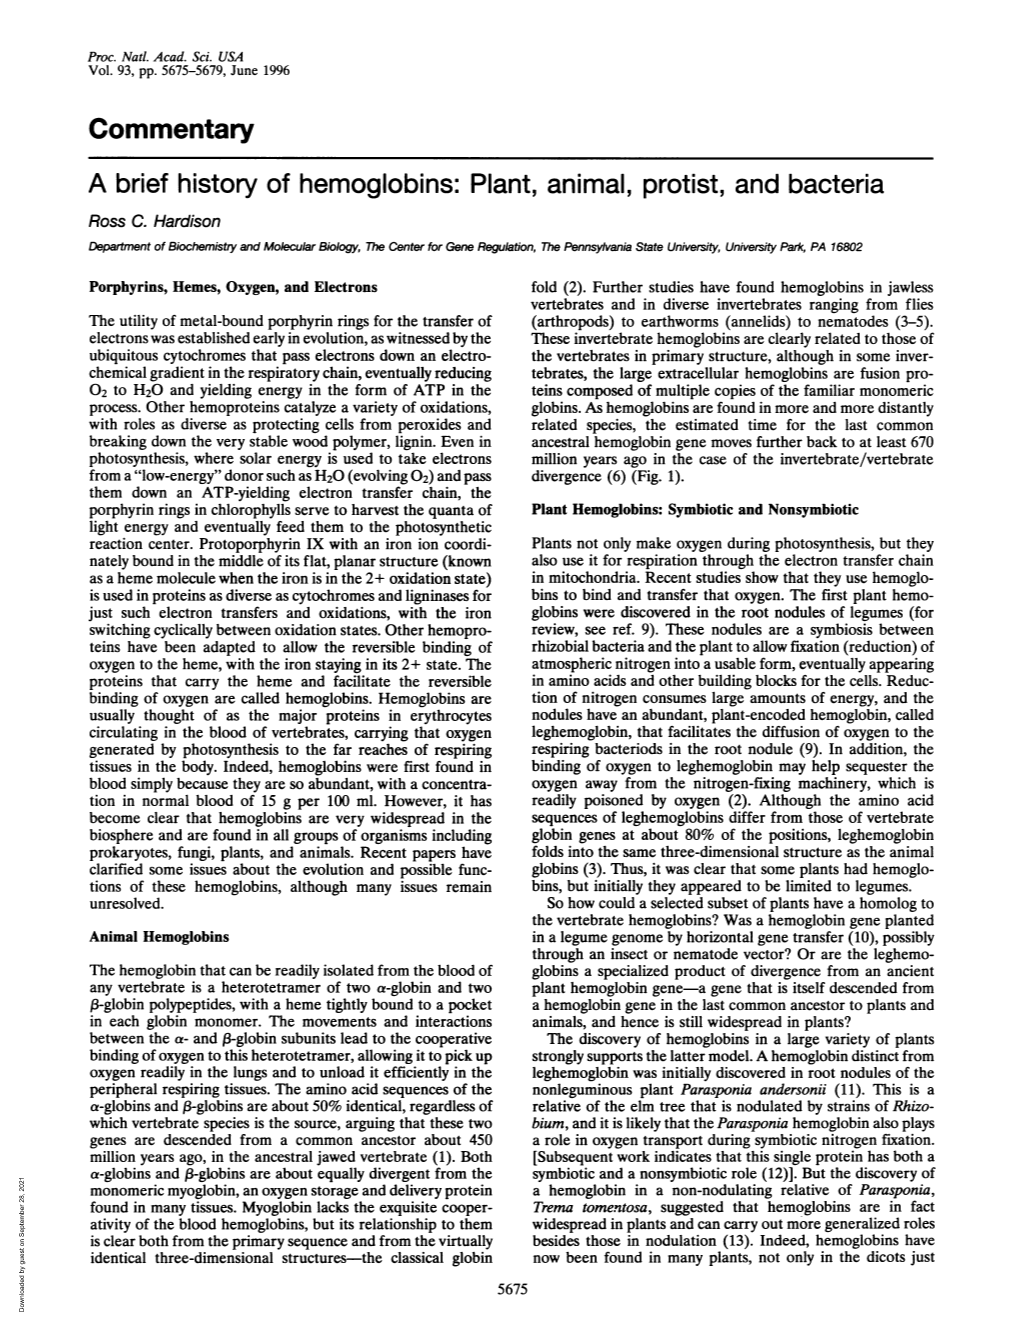 Commentary a Brief History of Hemoglobins: Plant, Animal, Protist, and Bacteria Ross C